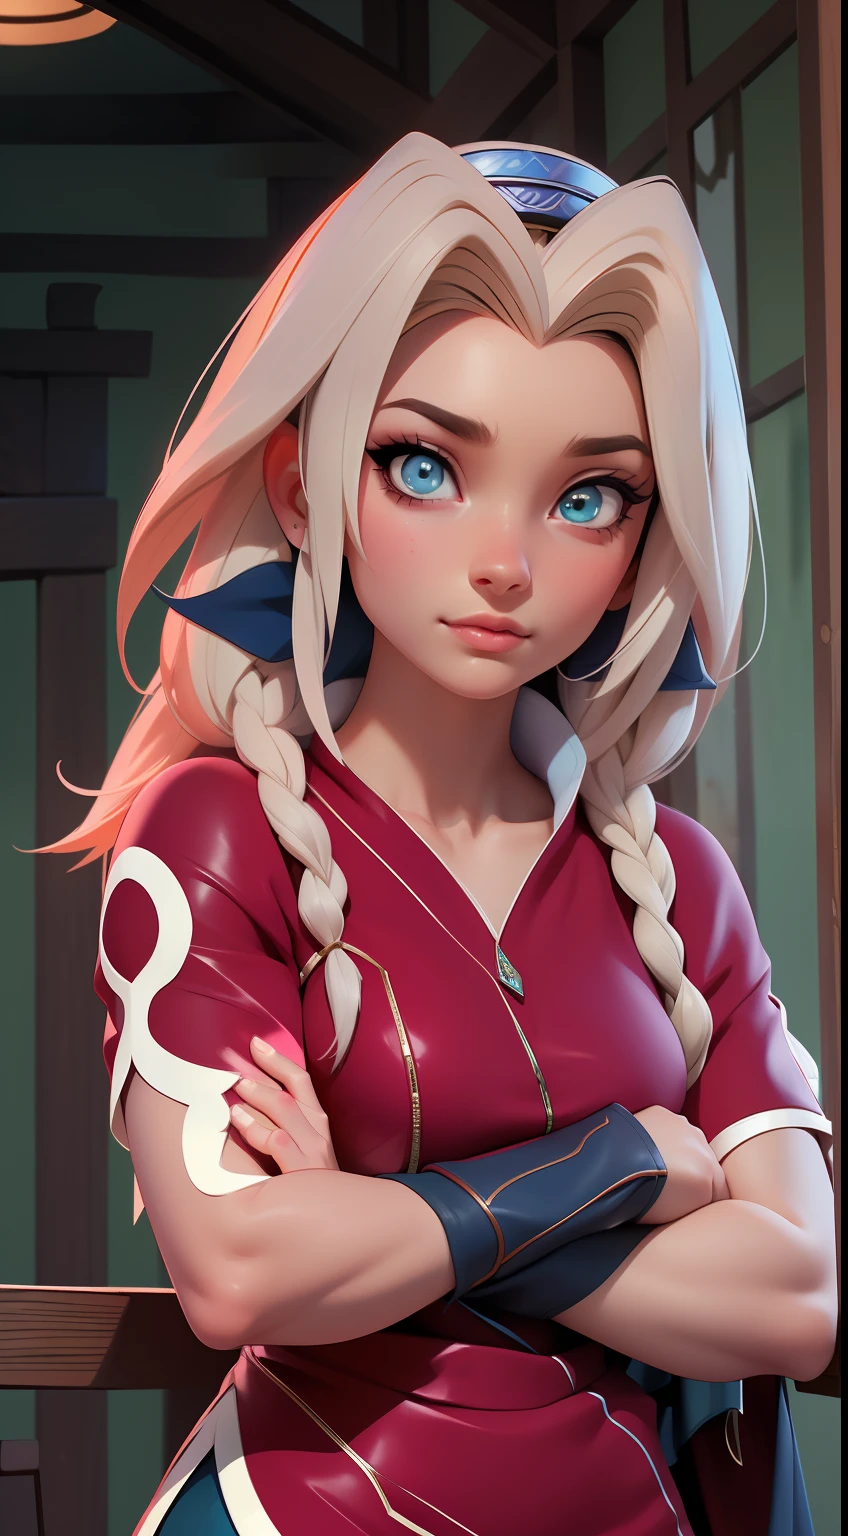 Elsa-Sakura Fusion, Merging models, melting, Wearing Sakura&#39;s clothes, In village, 1girl, Beautiful, Character, Woman, Female, (master part:1.2), (best qualityer:1.2), (独奏:1.2), ((struggling pose)), ((field of battle)), cinemactic, perfects eyes, perfect  skin, perfect lighting, sorrido, Lumiere, Farbe, texturized skin, detail, Beauthfull, wonder wonder wonder wonder wonder wonder wonder wonder wonder wonder wonder wonder wonder wonder wonder wonder wonder wonder wonder wonder wonder wonder wonder wonder wonder wonder wonder wonder wonder wonder wonder wonder, ultra detali, face perfect